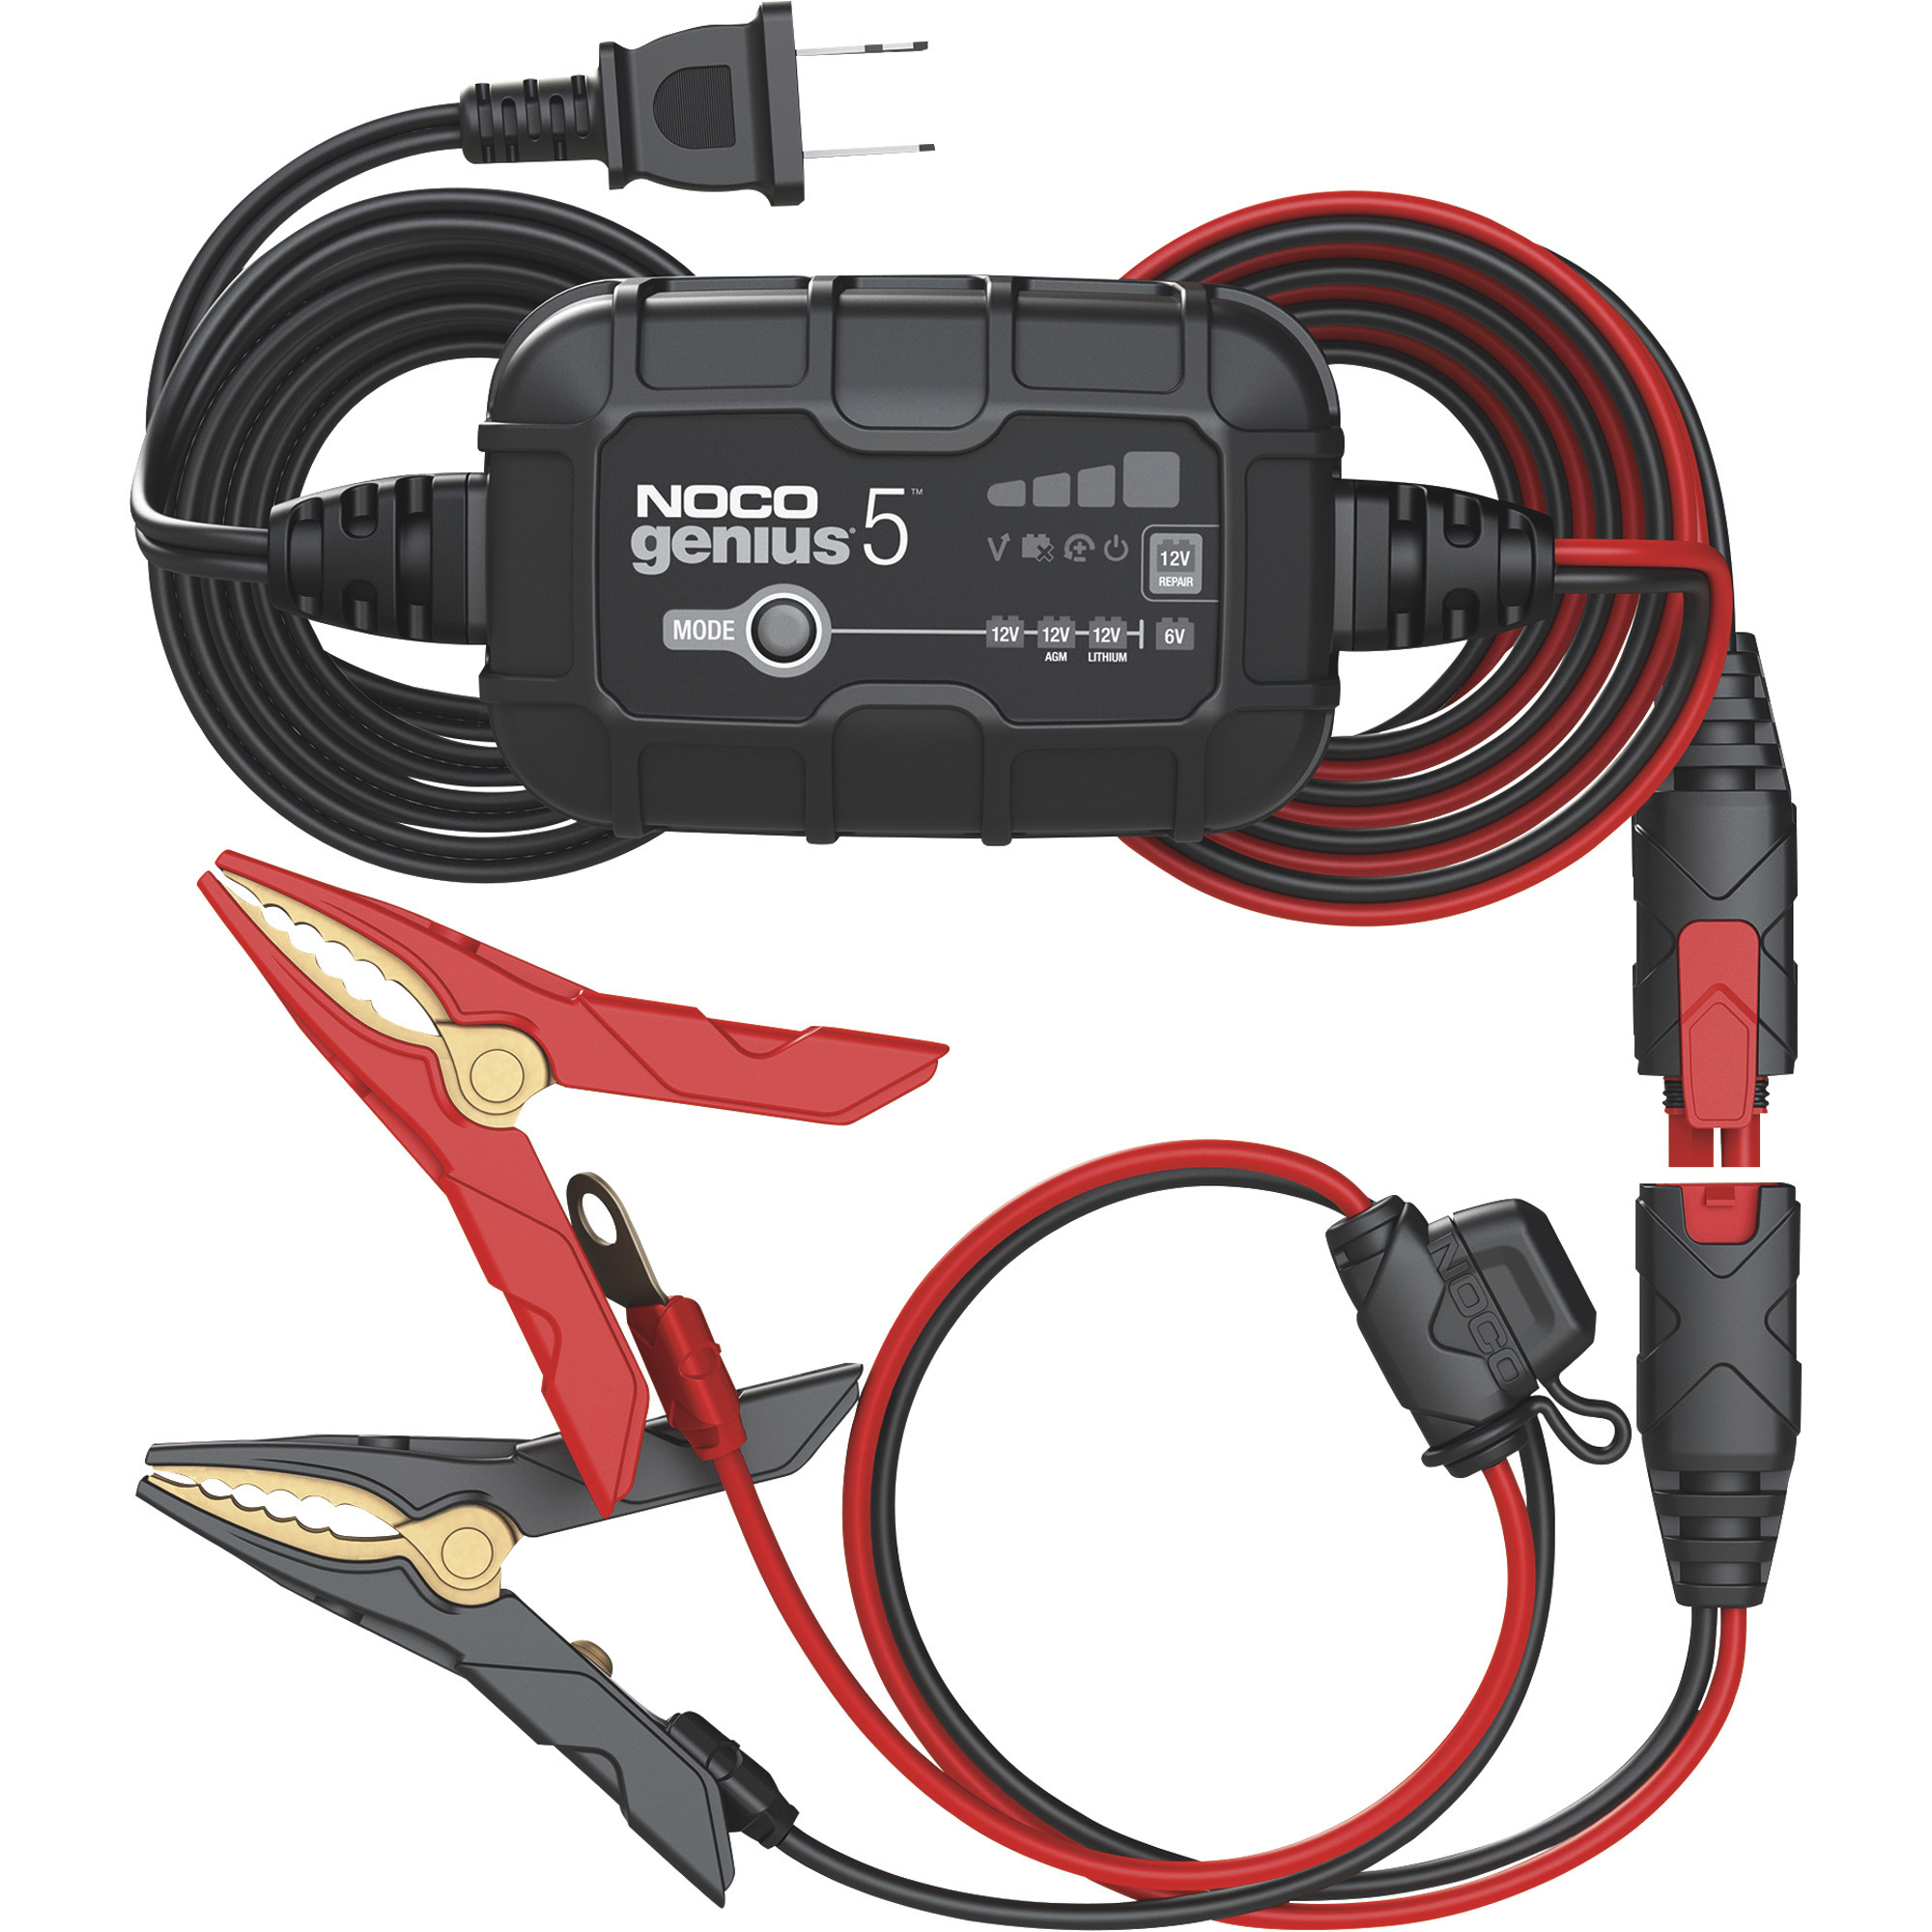 NOCO Genius5 Portable Automatic Battery Charger/Maintainer â 5 Amp, 6/12 Volt, Model GENIUS5